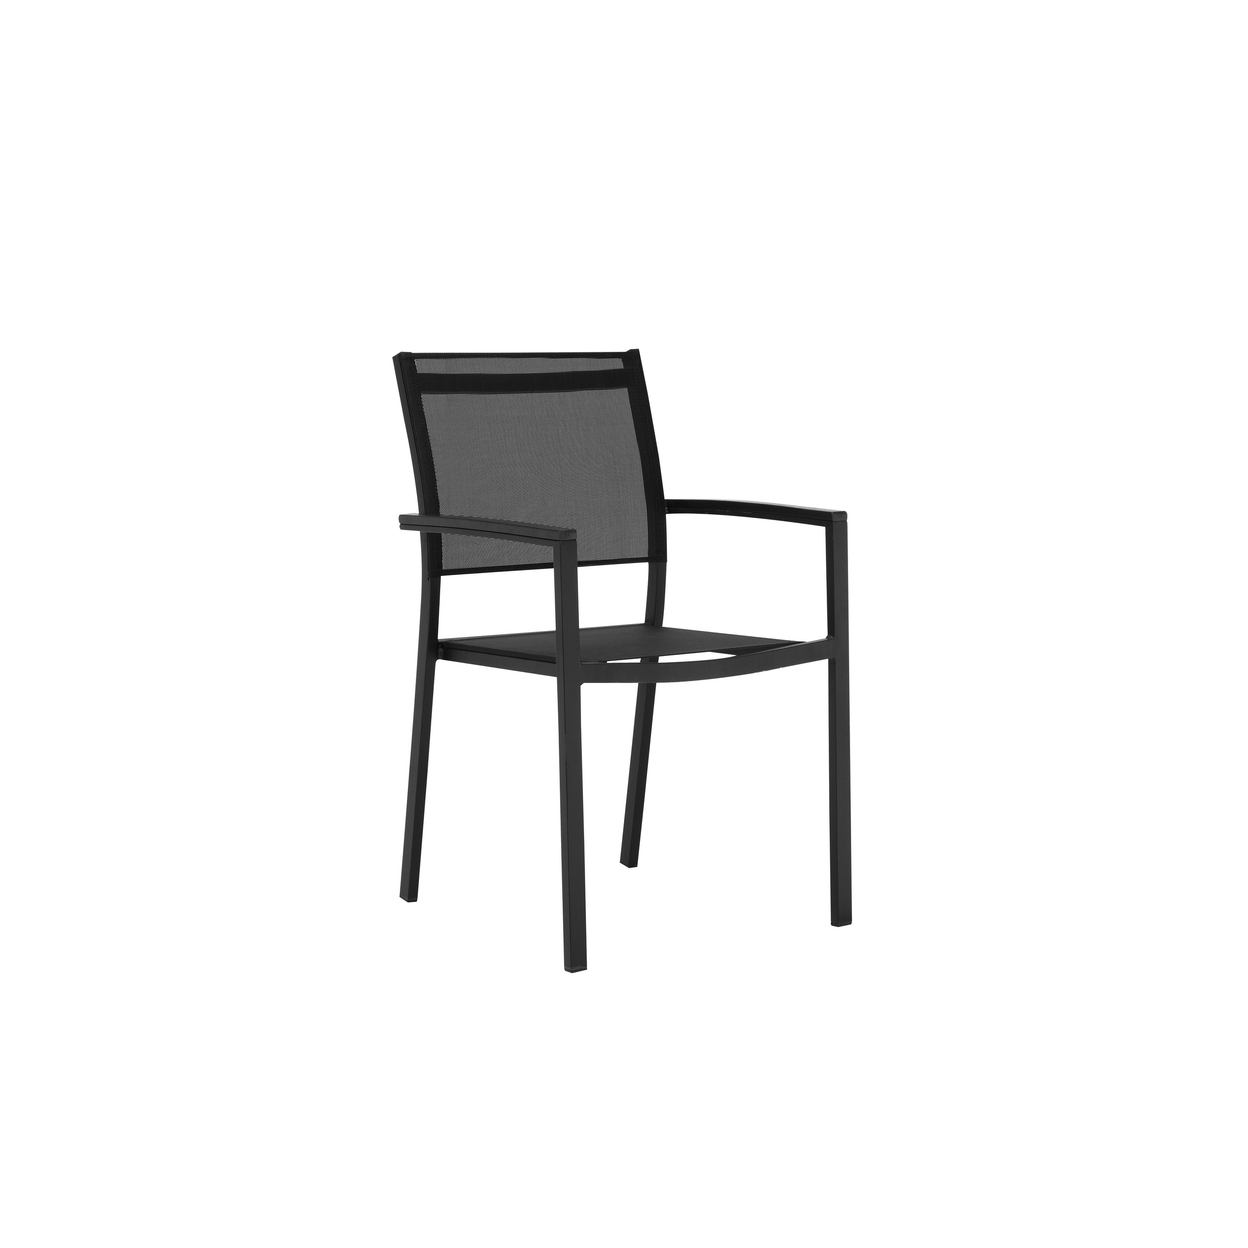 Fifi 21 Inch Set Of 6 Dining Chairs, Black Aluminum Frame, Easily Stackable- Saltoro Sherpi